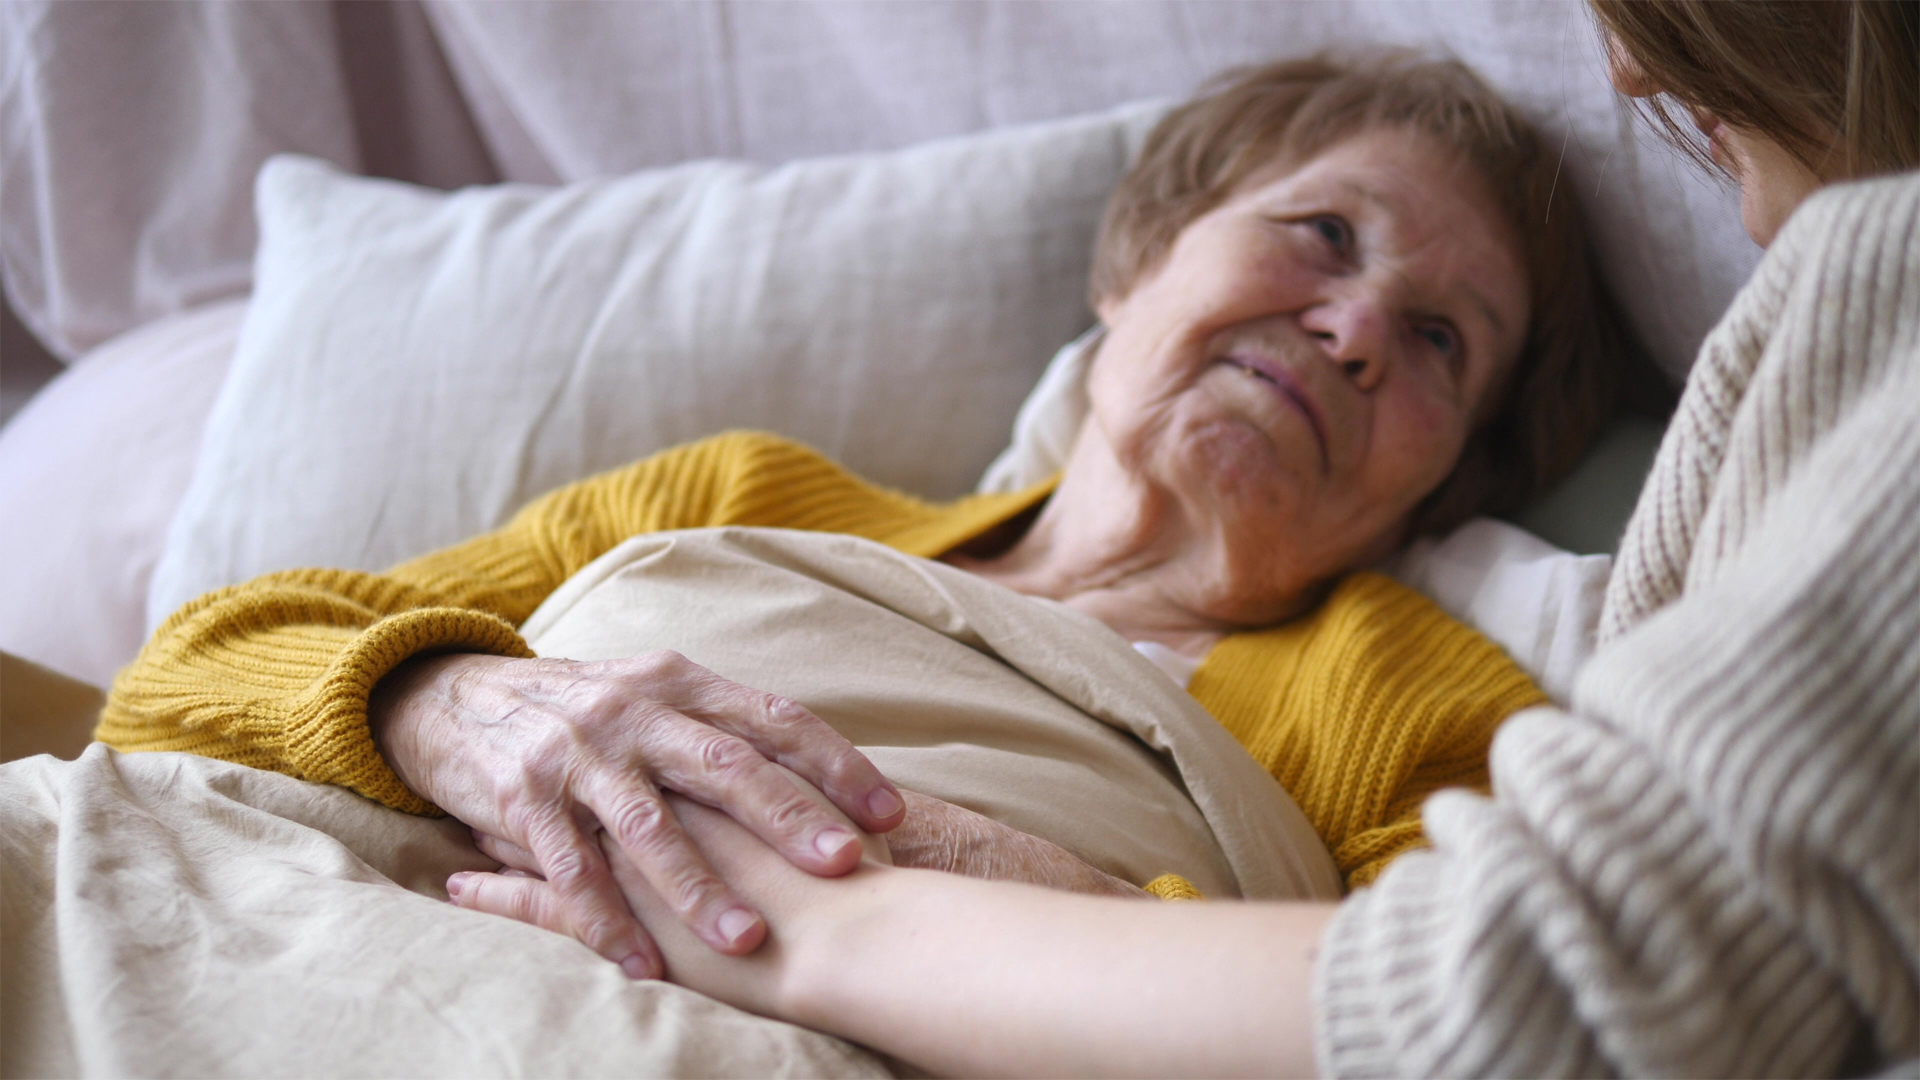 An elderly woman lying in bed touching the hand of the overnight care provider who looks after her during the night.